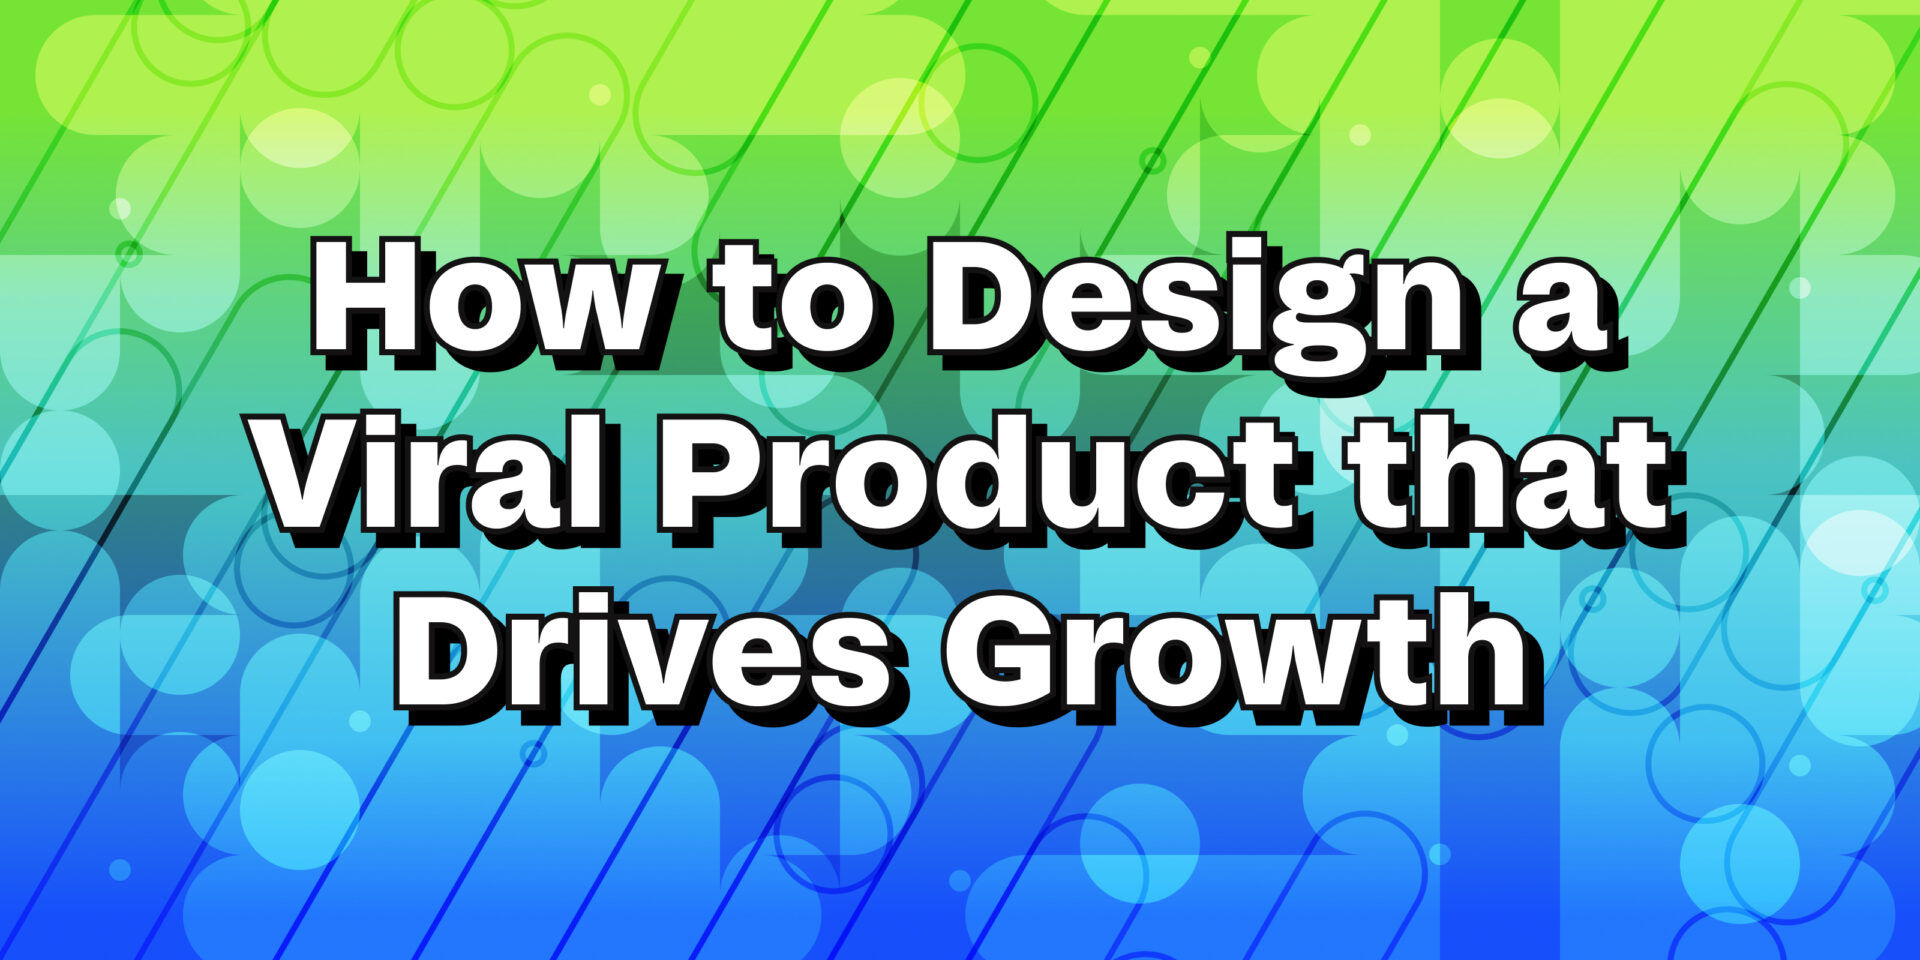 How to design a viral product that drives growth